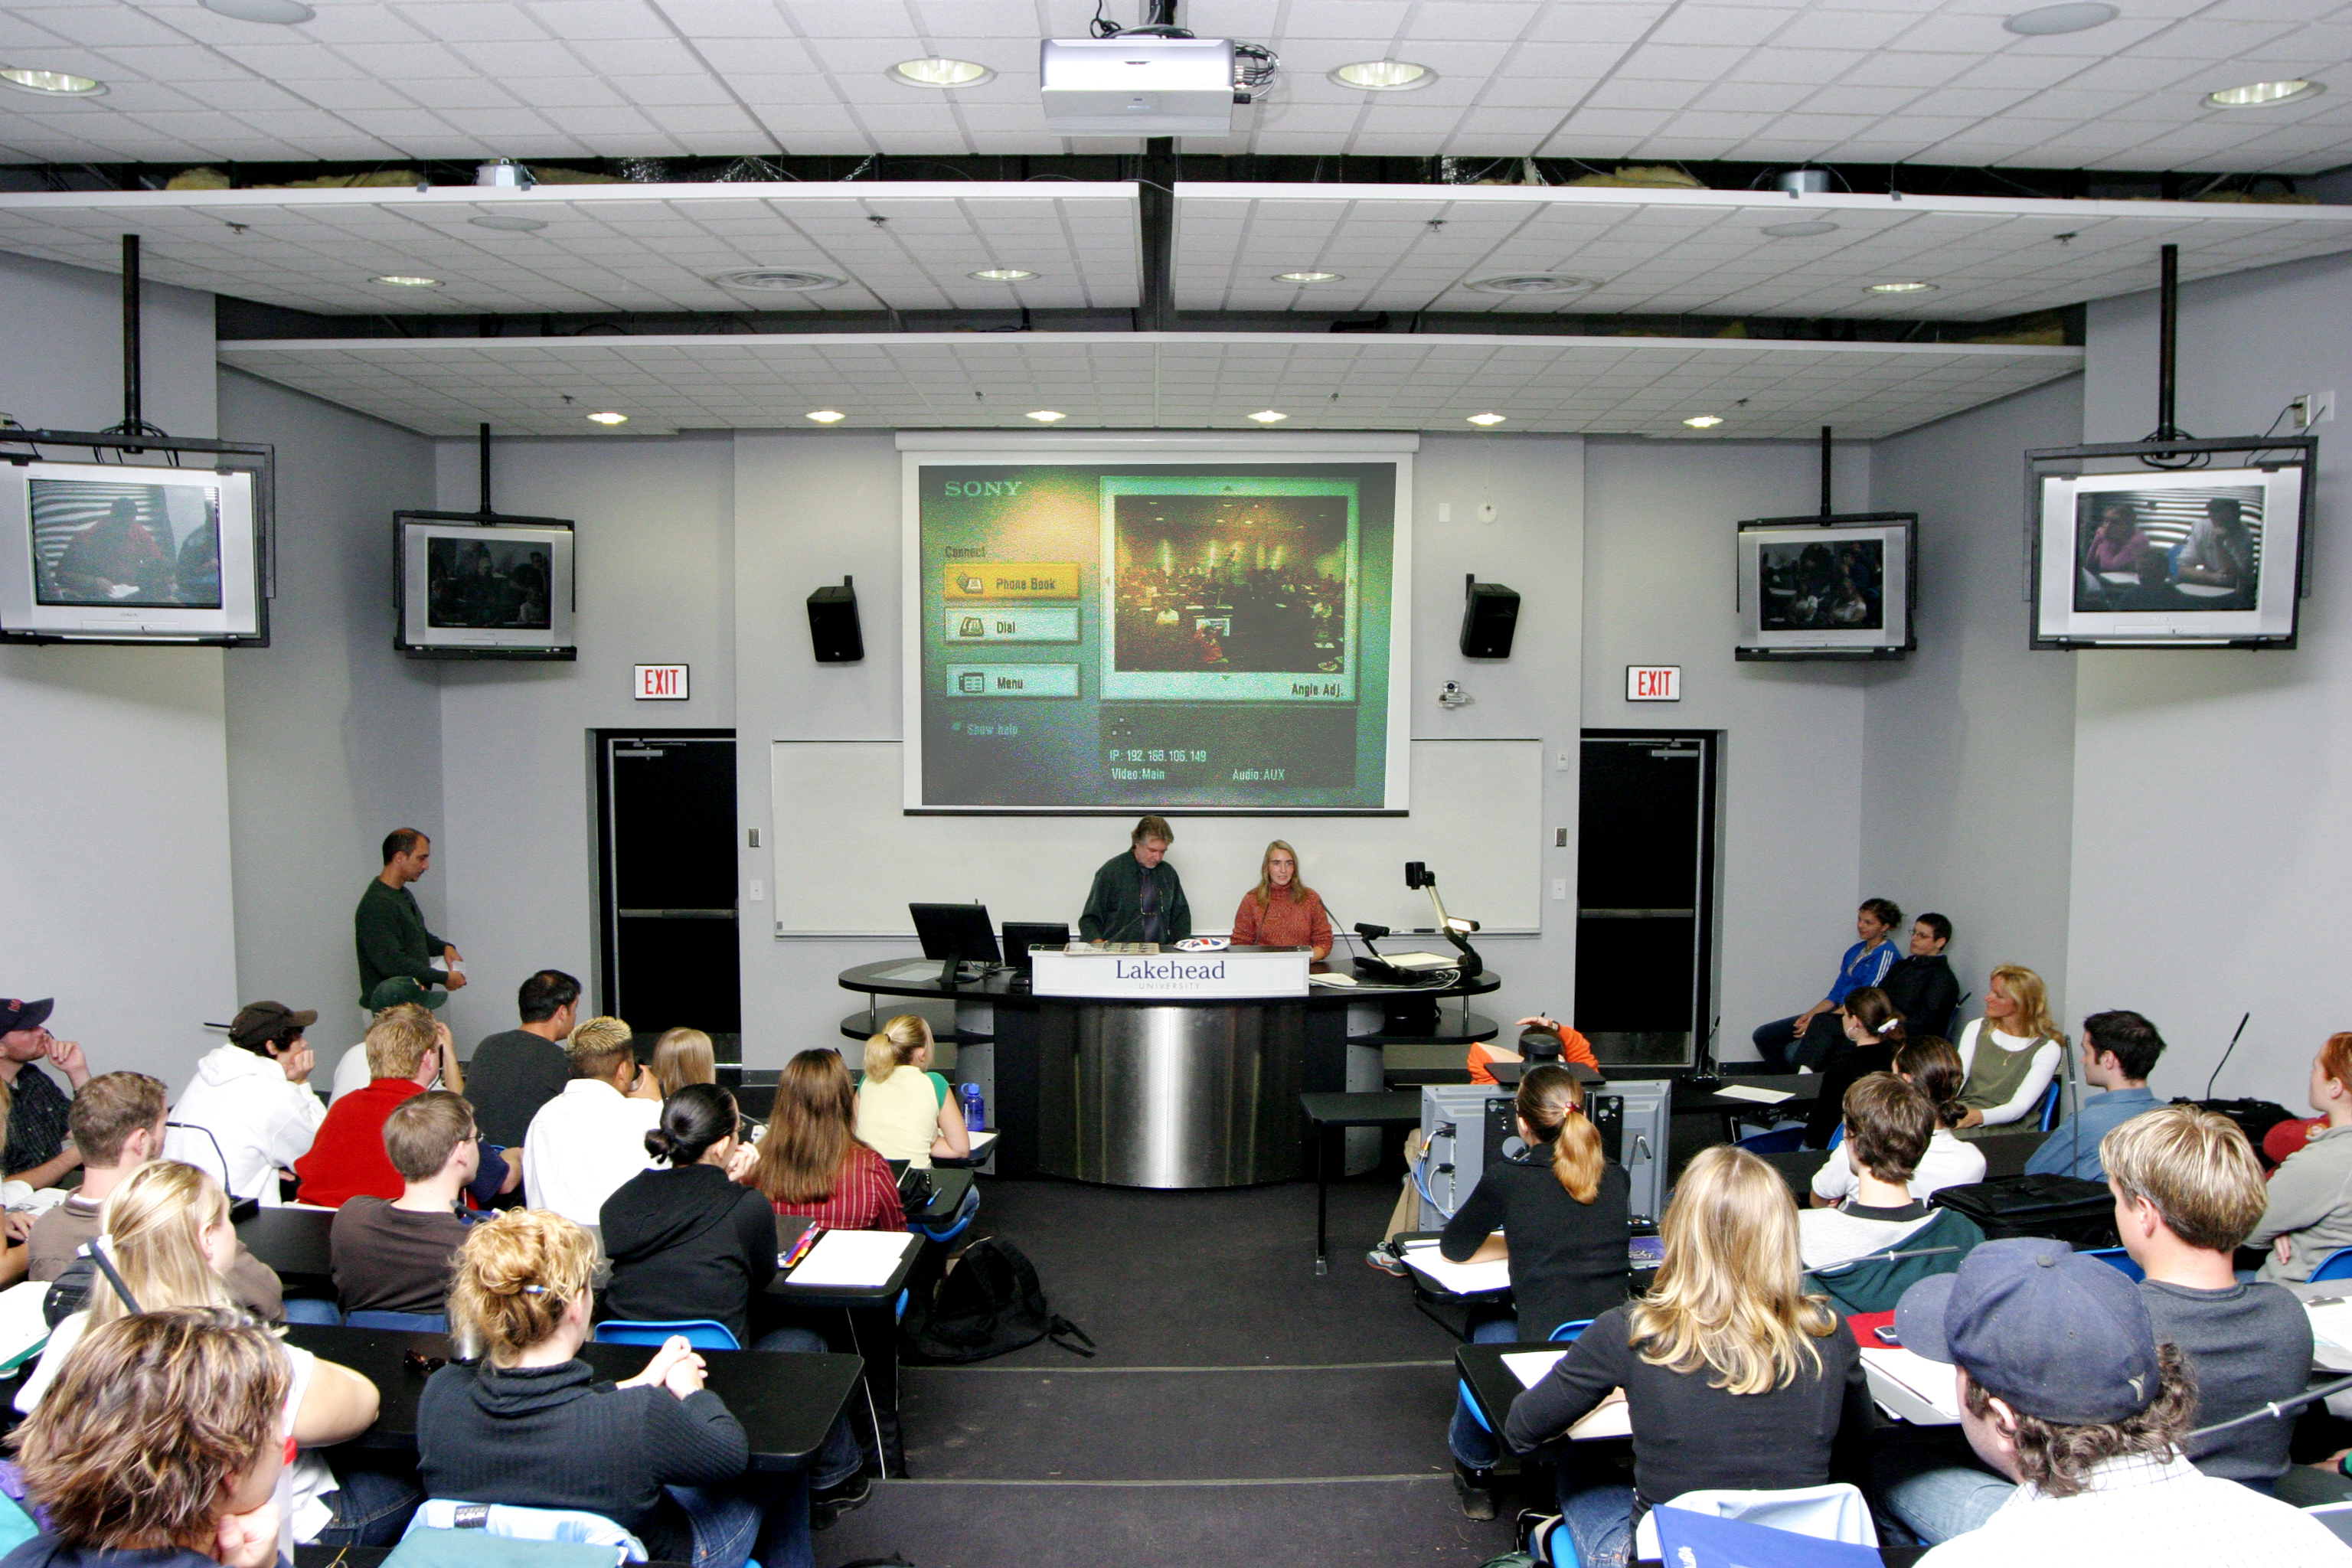 Multimedia classroom with class in session displaying use of multimedia equipment